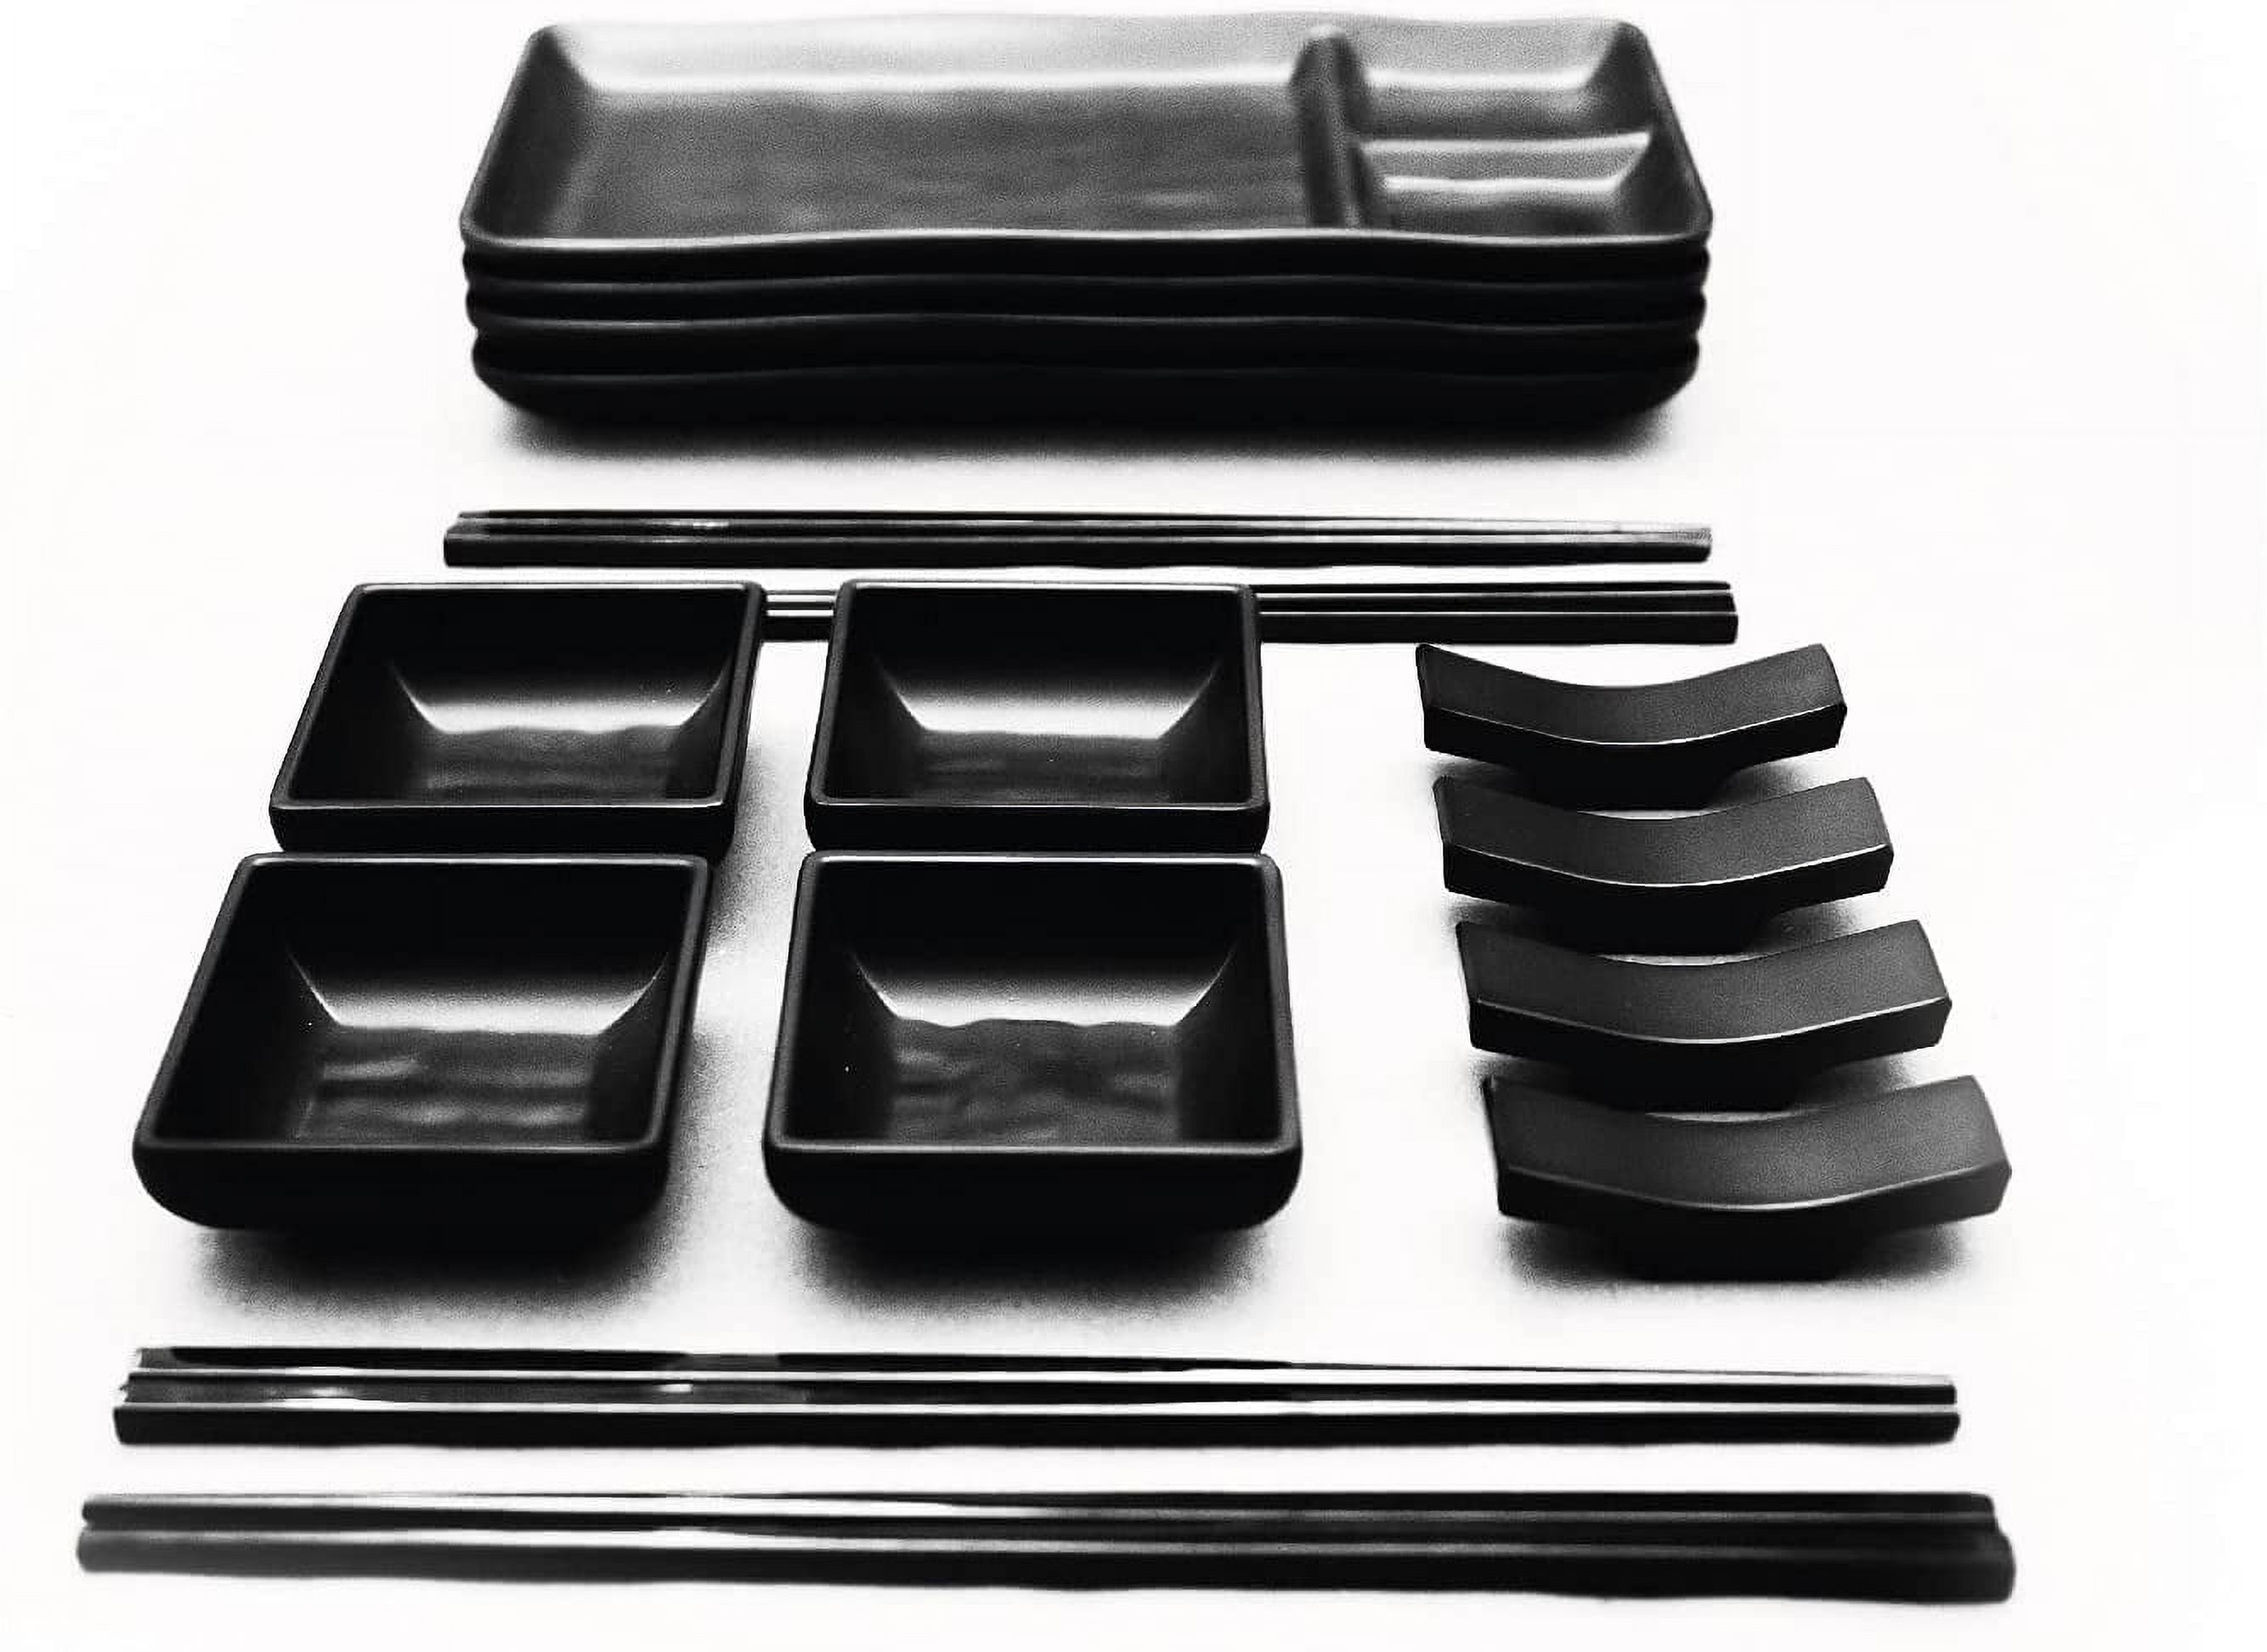 Goliber Sushi Dinnerware 16 Pieces - Sushi Plate Set - Includes 4